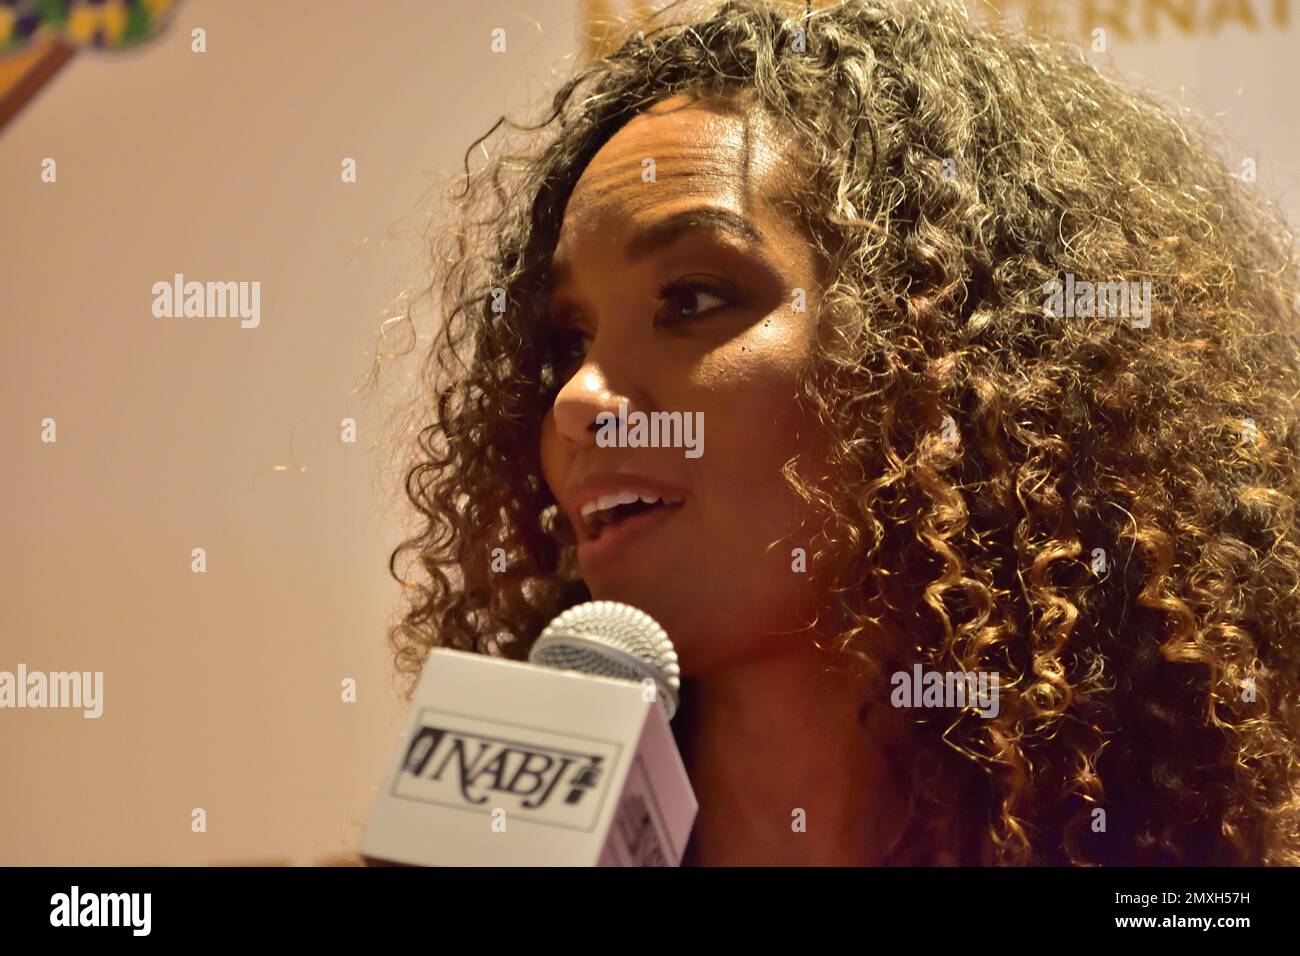 Mara Brock Akil on the red carpet promoting CW's Black Lightning at the 2017 NABJ Convention in New Orleans. Stock Photo